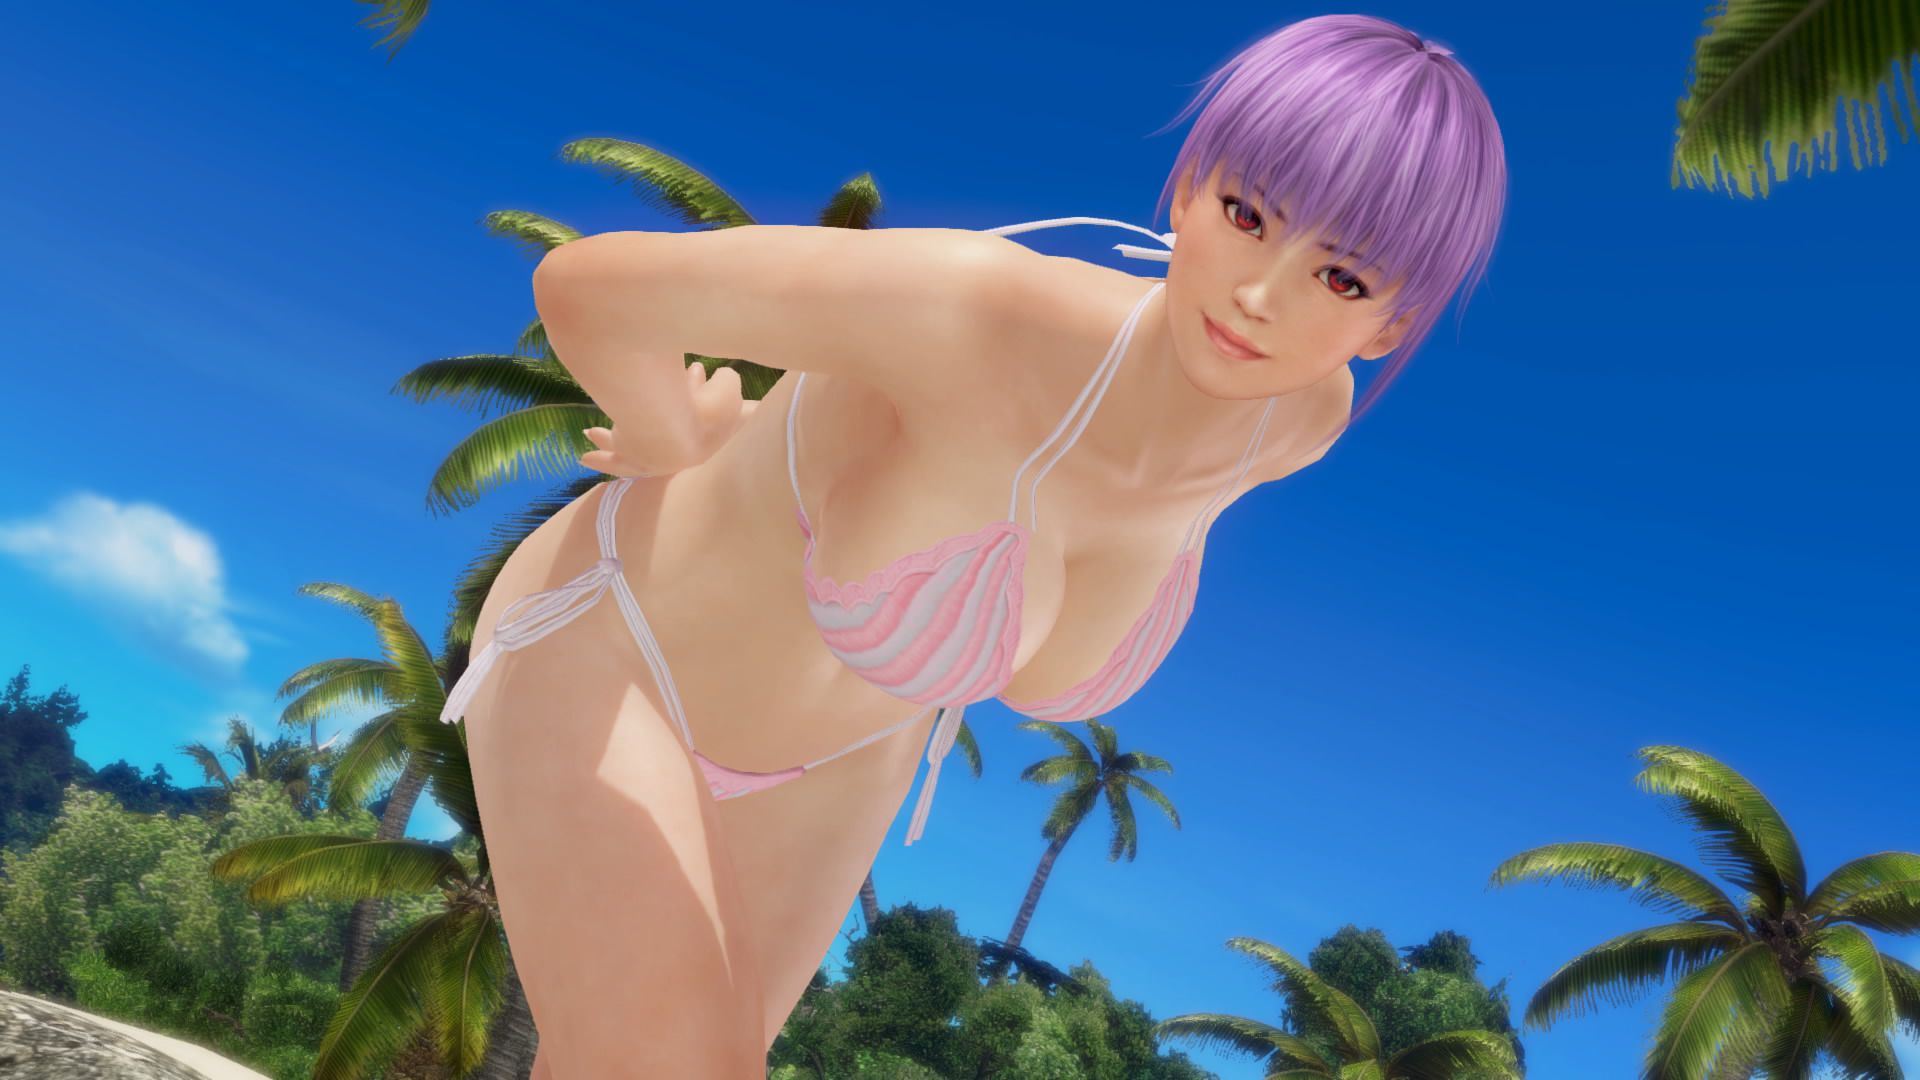 Doax3 "The color which suits the Aya-chan is pink" theory is verified 2